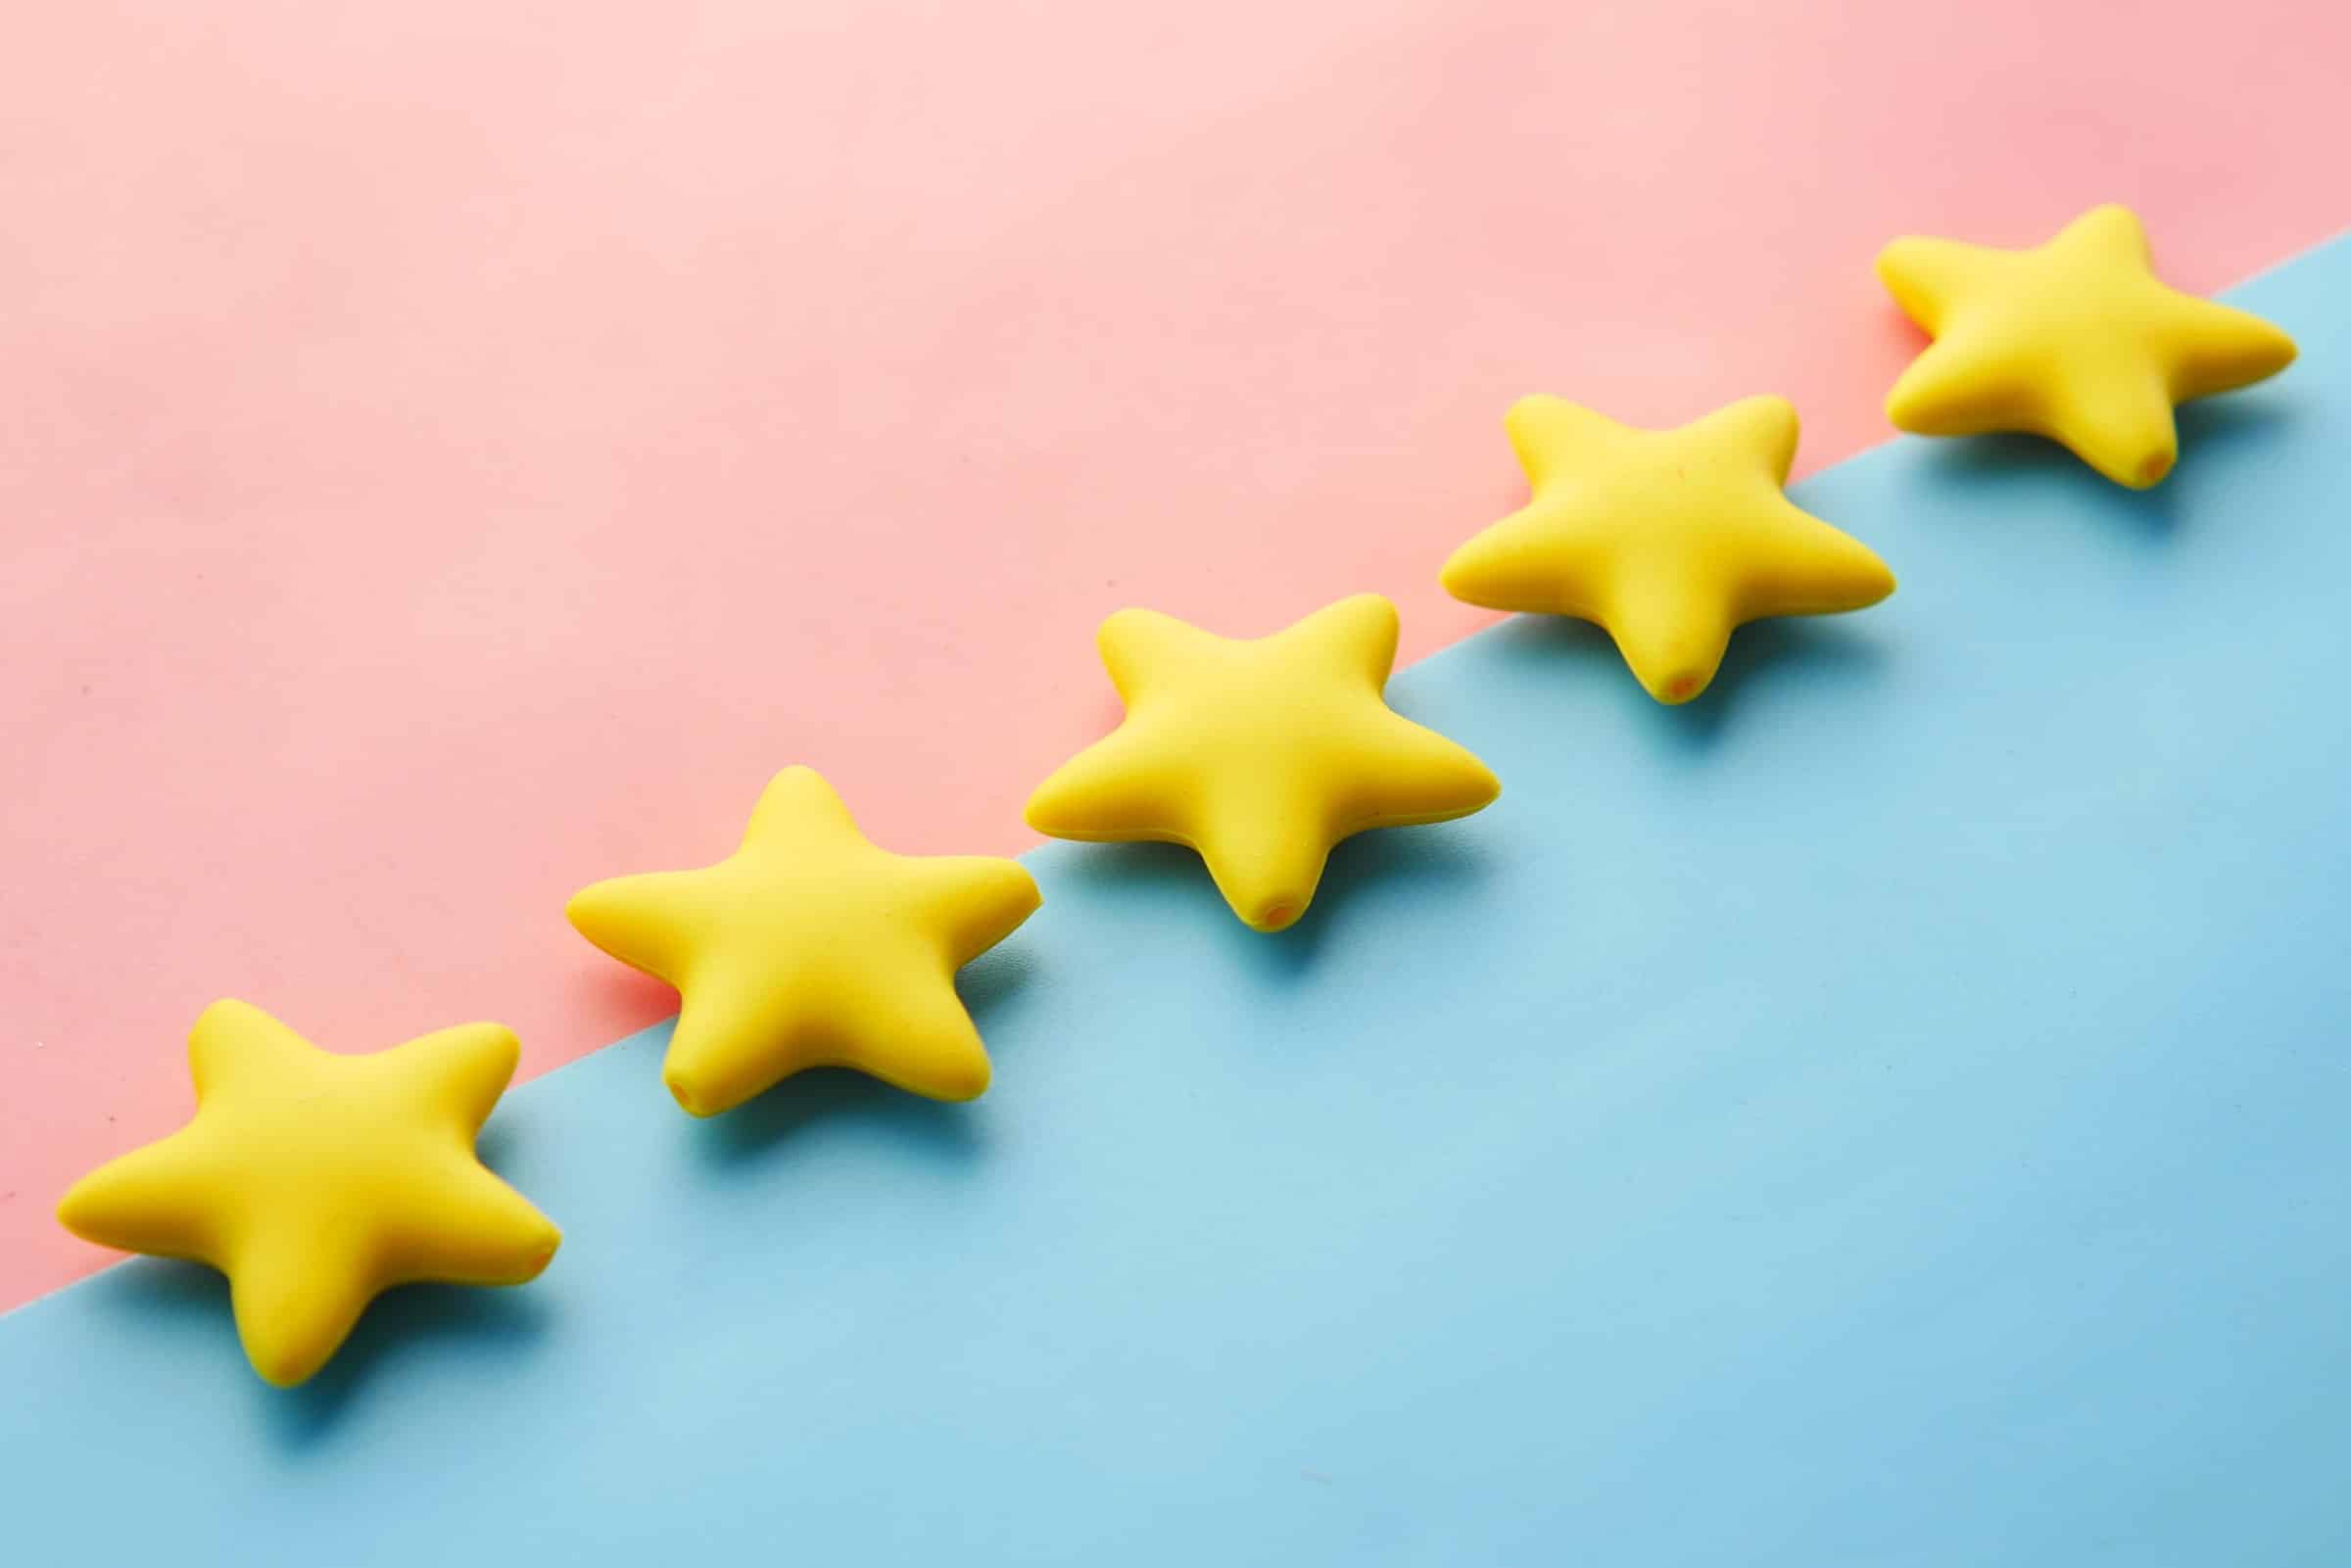 3d photo of 5 golden stars on pink and blue background for best customer service article